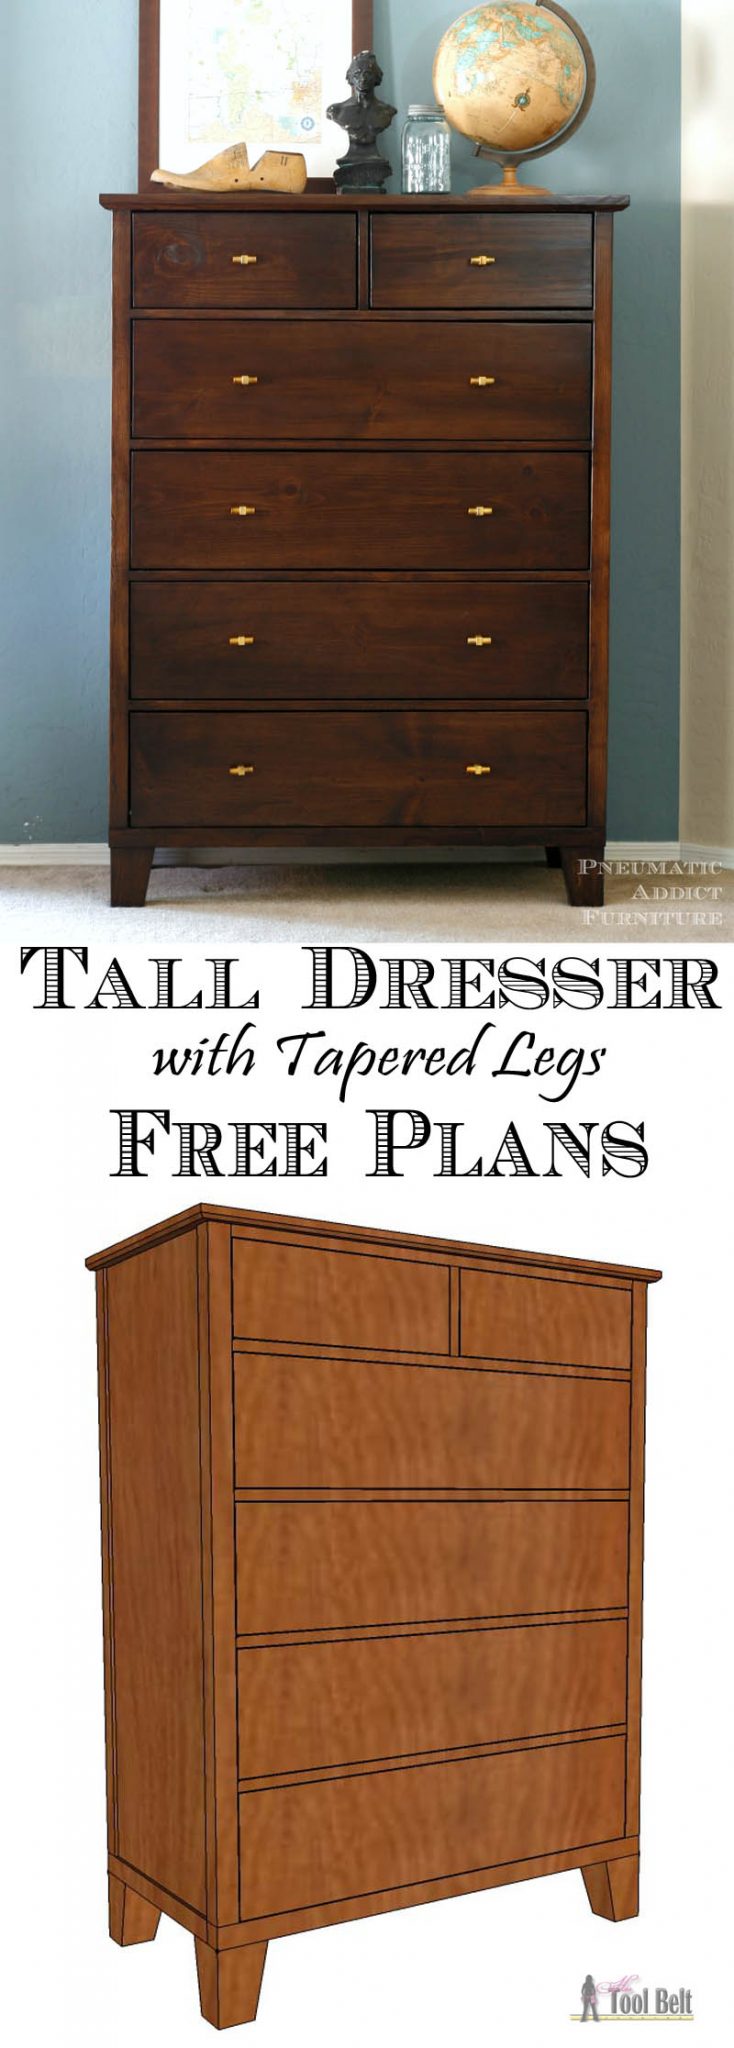 Tall Dresser with Tapered Legs - Her Tool Belt